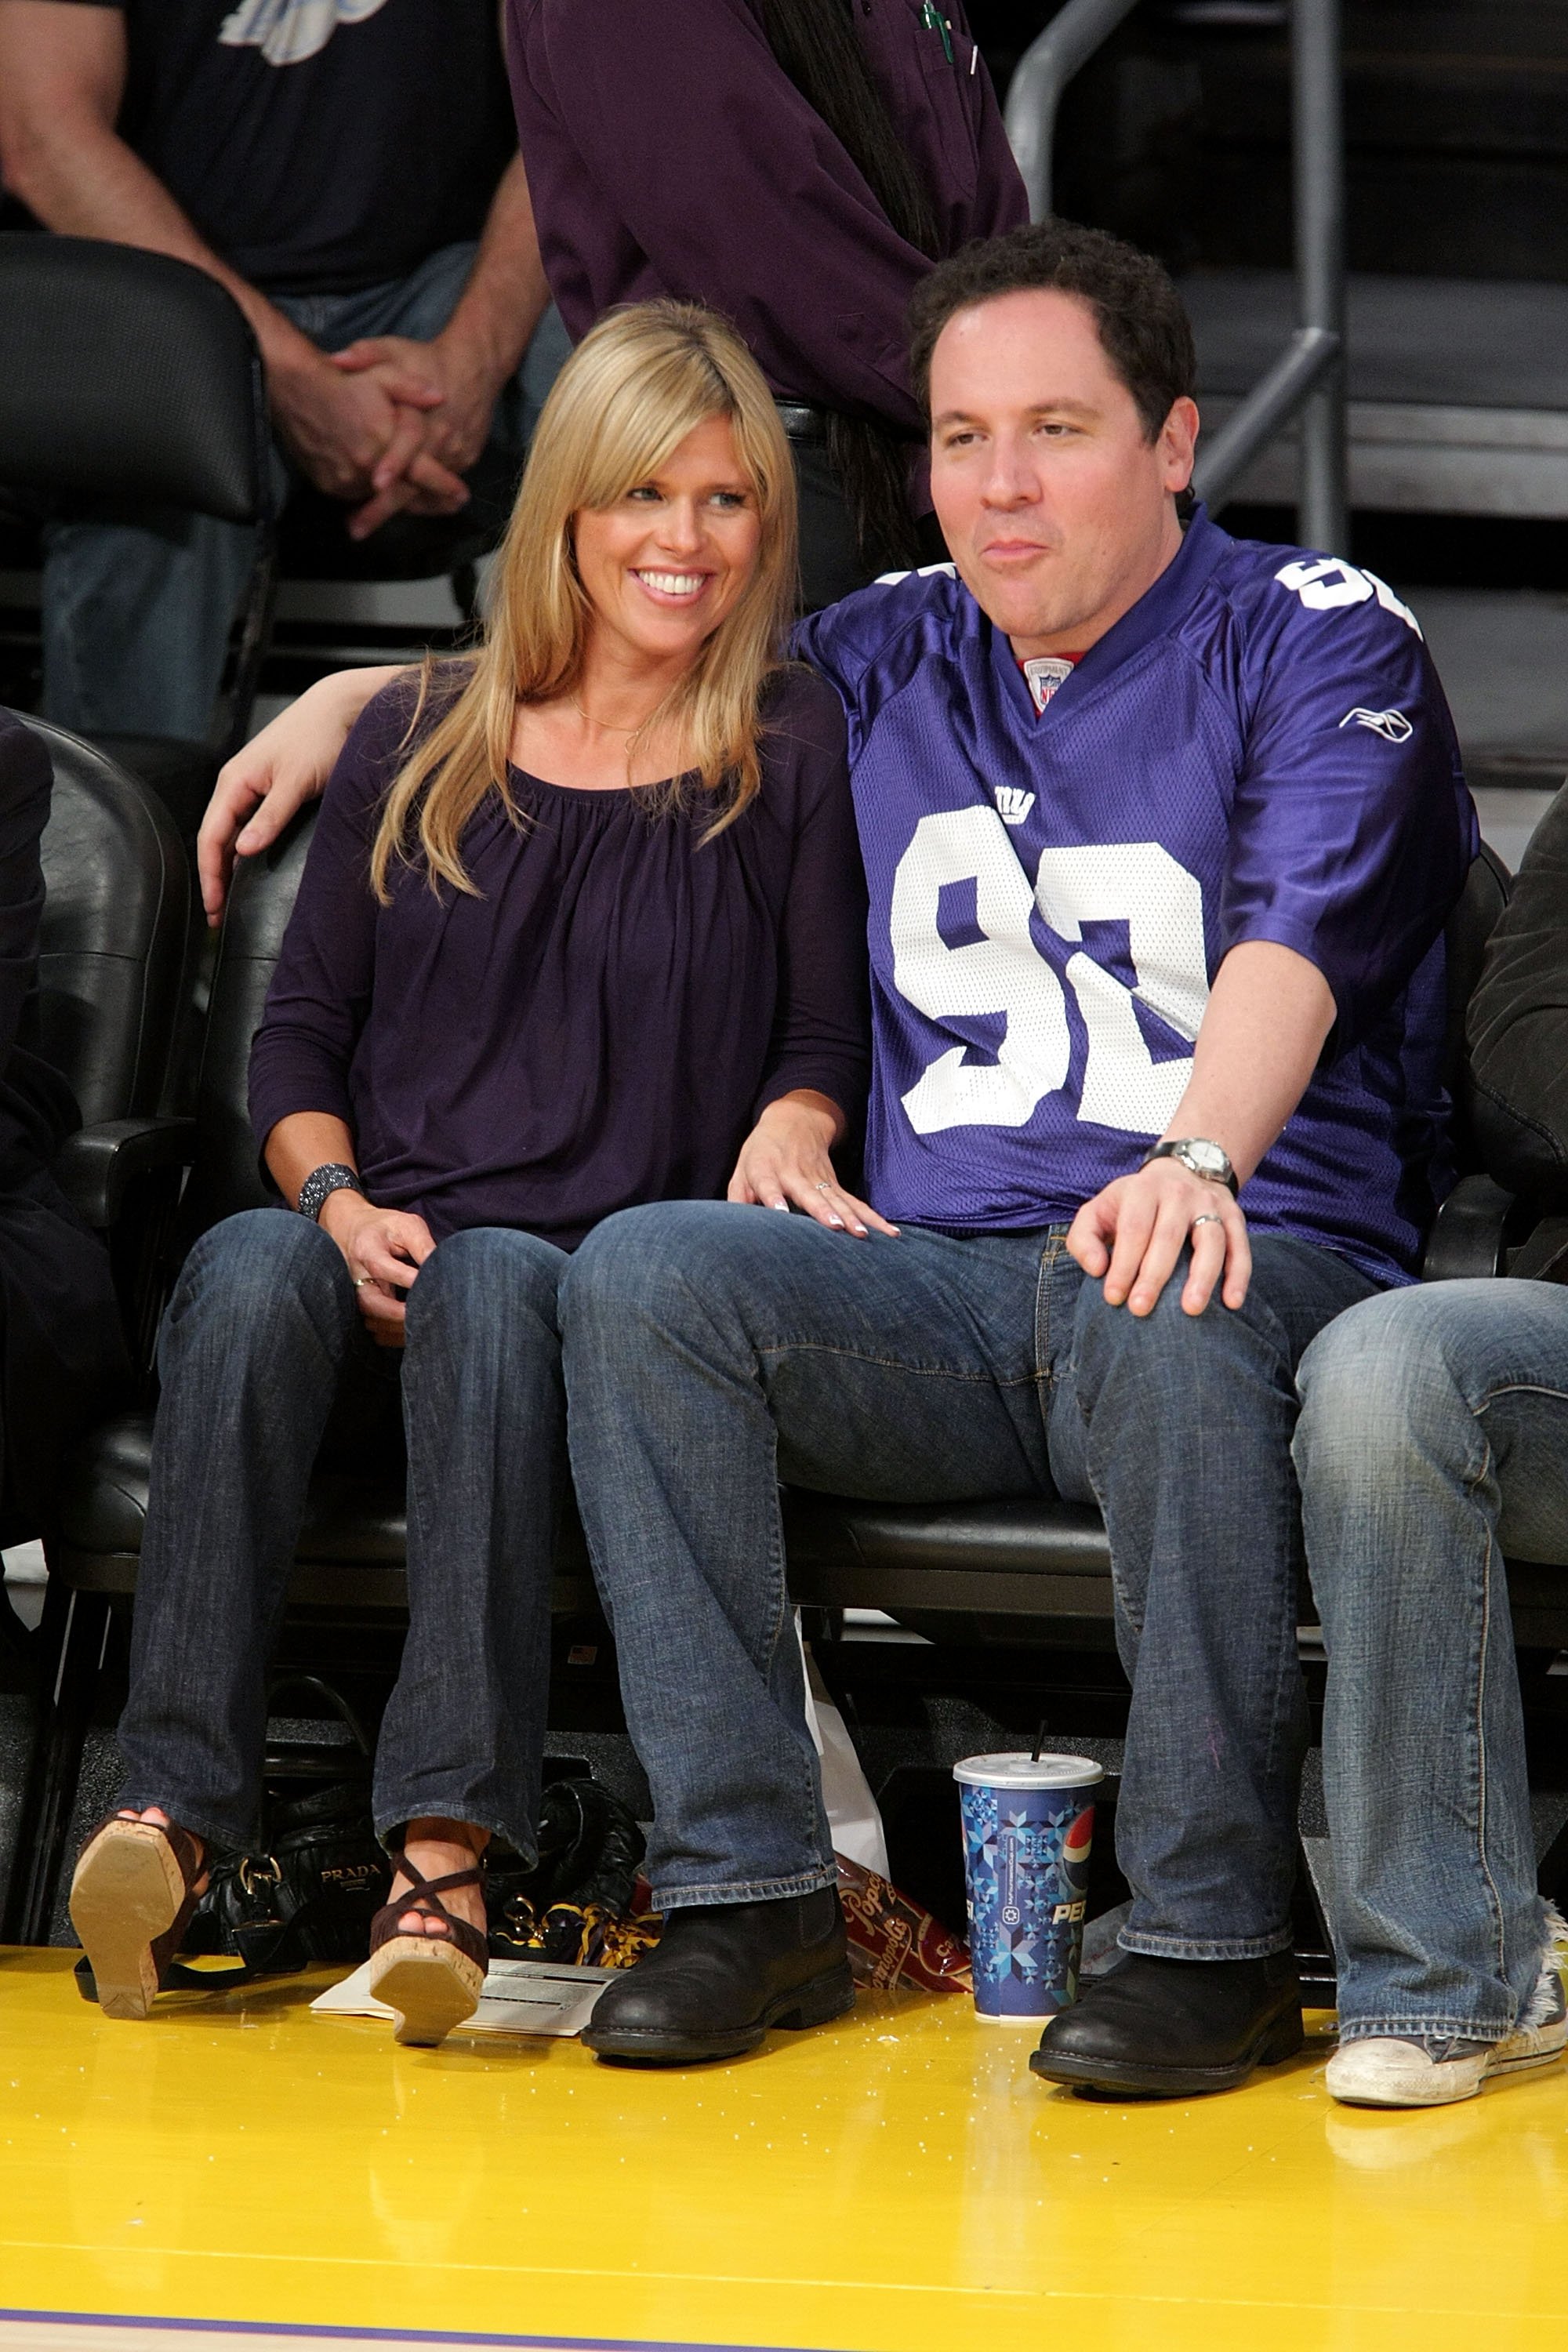 Joya Tillem and Jon Favreau watching an NBA playoff game between the Los Angeles Lakers vs Utah Jazz at the Staples Center in Los Angeles, California on May 14, 2008 |  Source: Getty Images